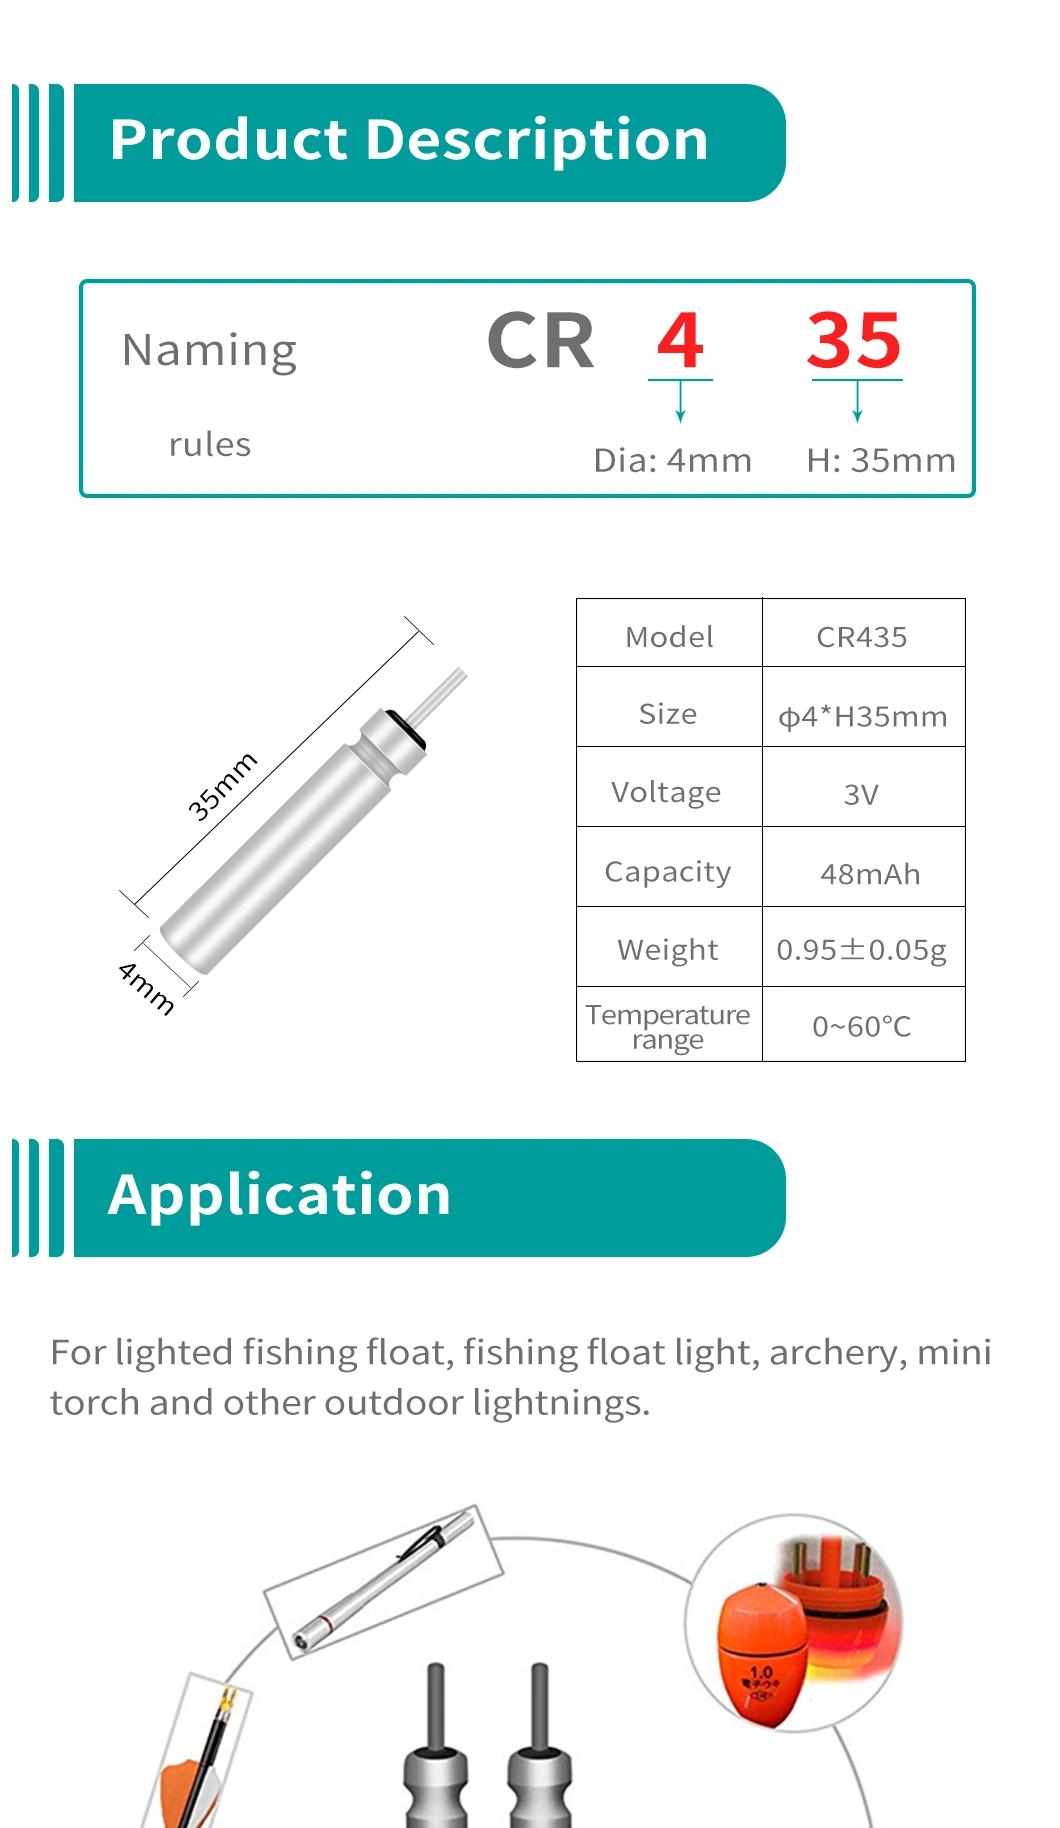 Dlyfull 3V Outdoor Night Fishing Waterproof Lithium Battery Pin Type Cell Cr435